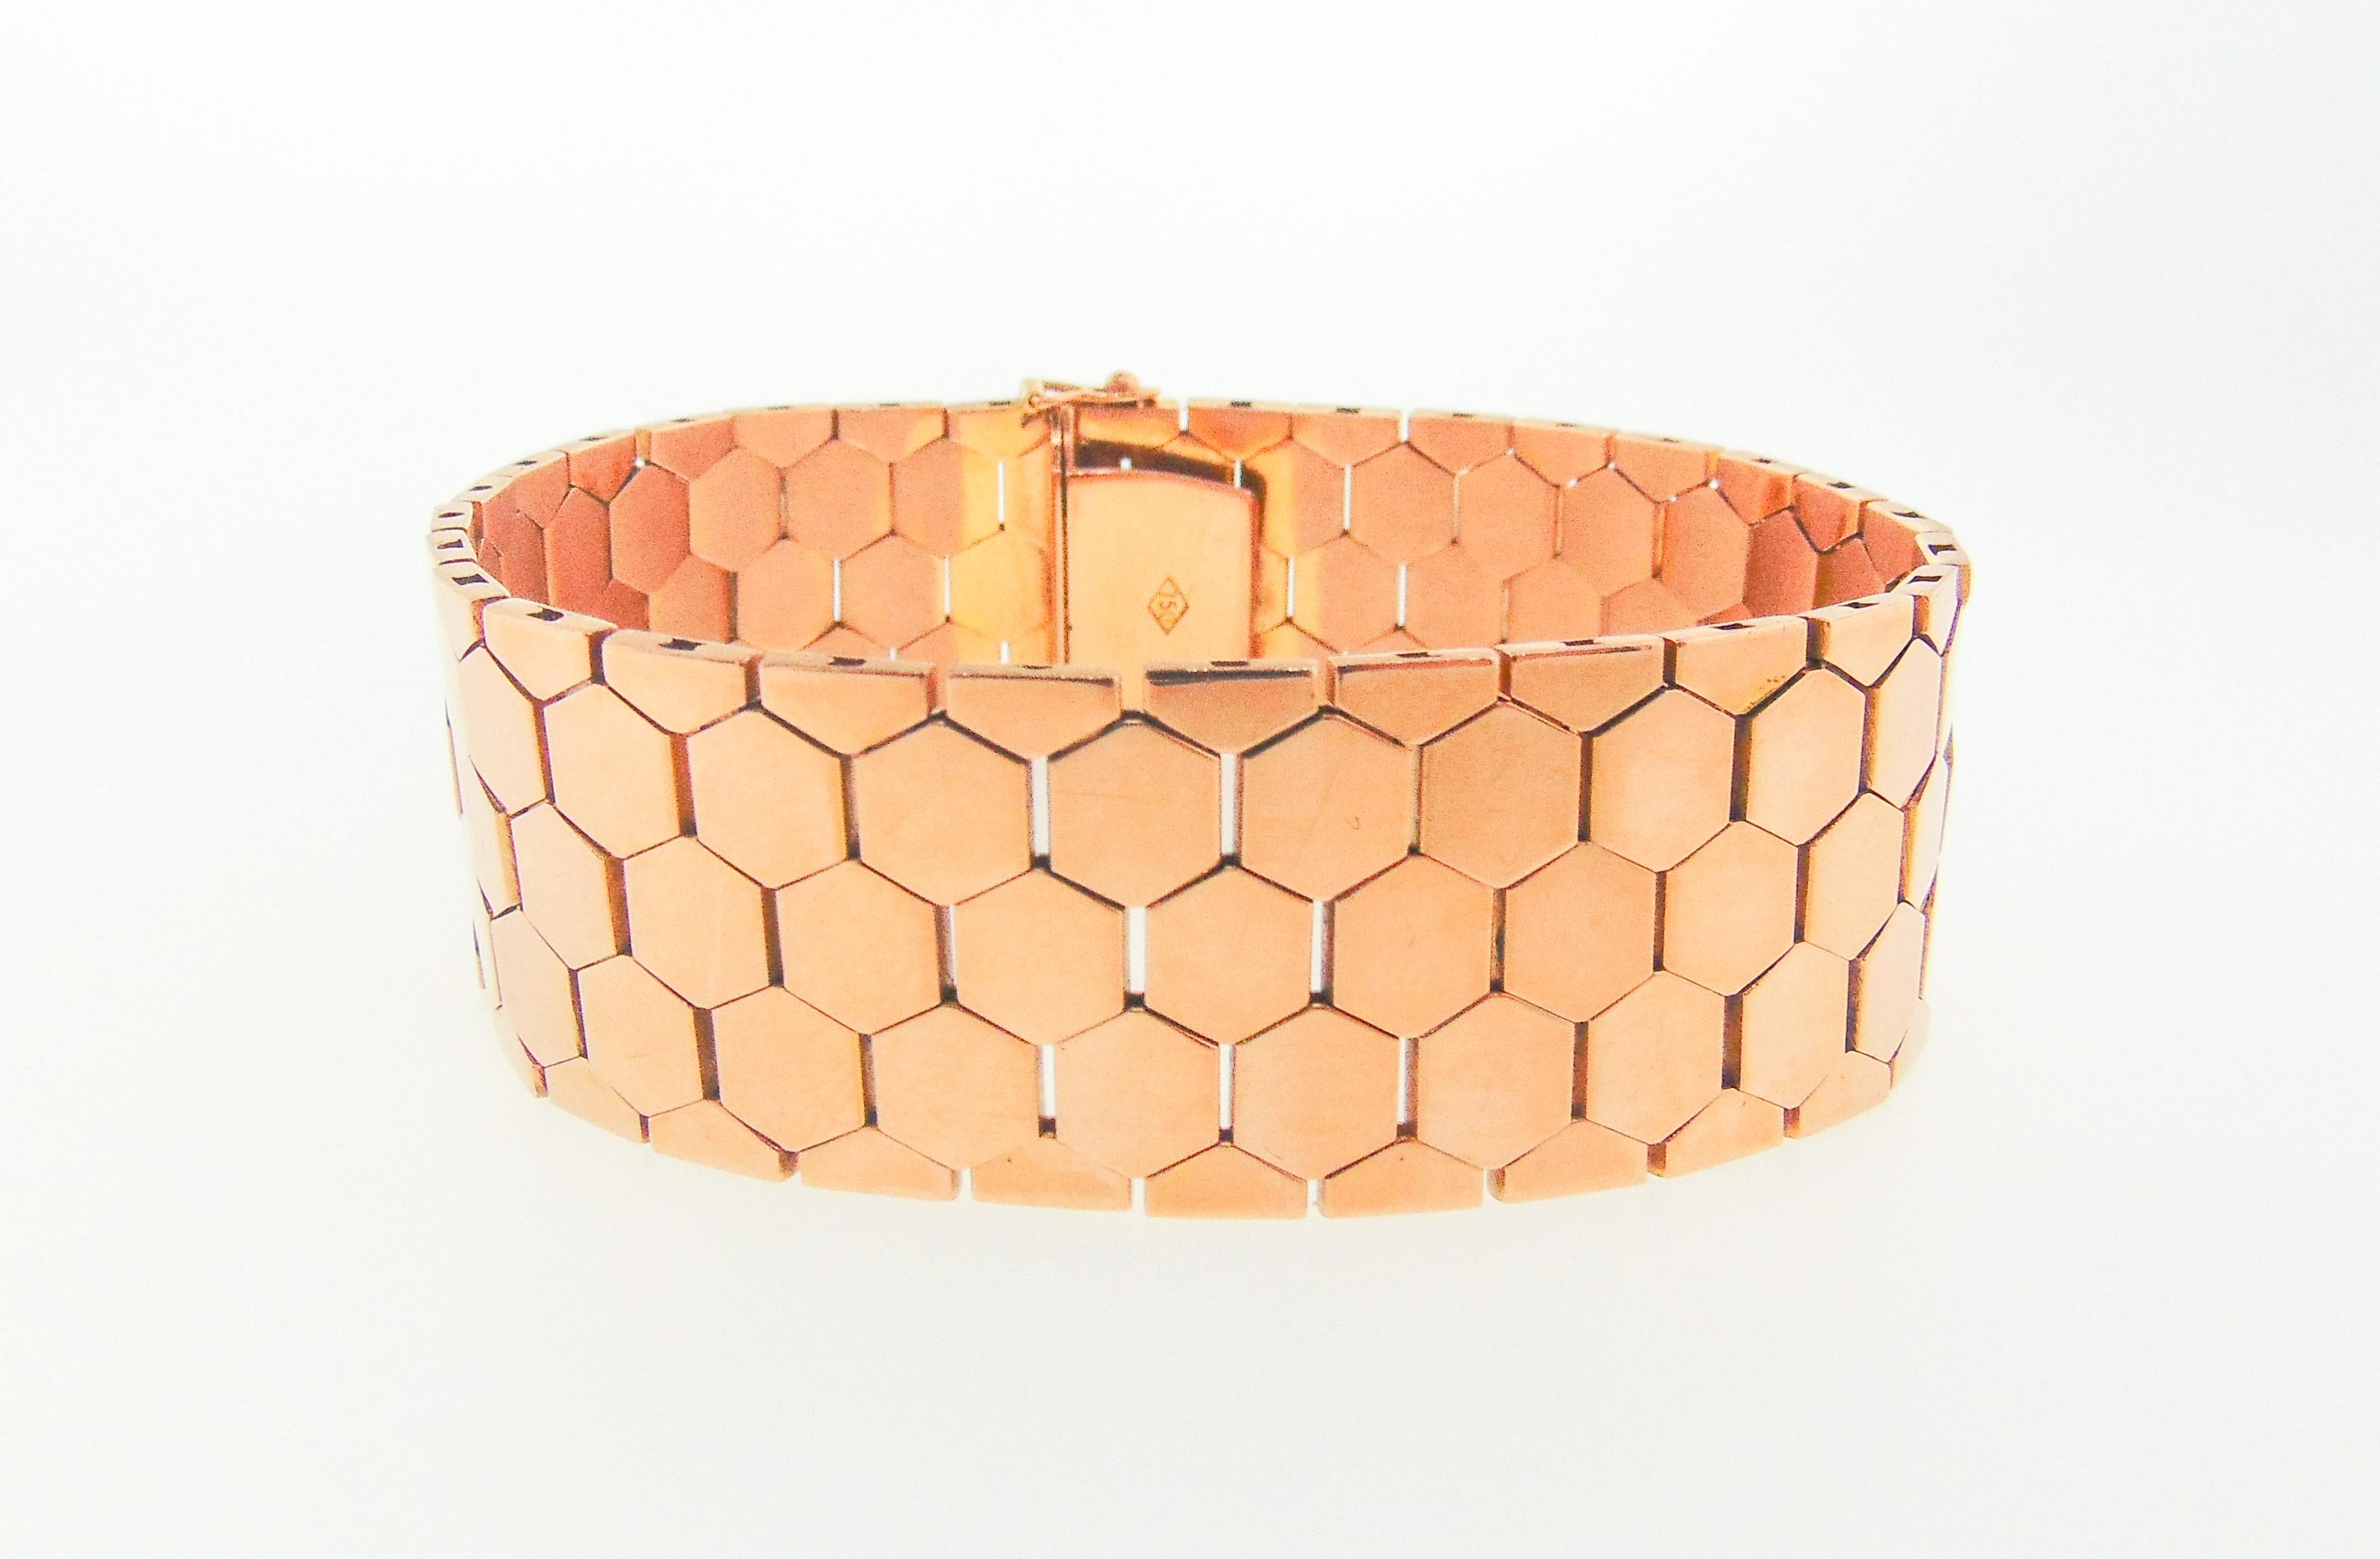 Luxuriously smooth and easy to wear 18 karat rose gold bracelet composed of highly flexible hexagon shape links. The bracelet measures 7.75 inches in length (can be shortened) by .75 inches in width, weighs 46 gross pennyweights, and features a